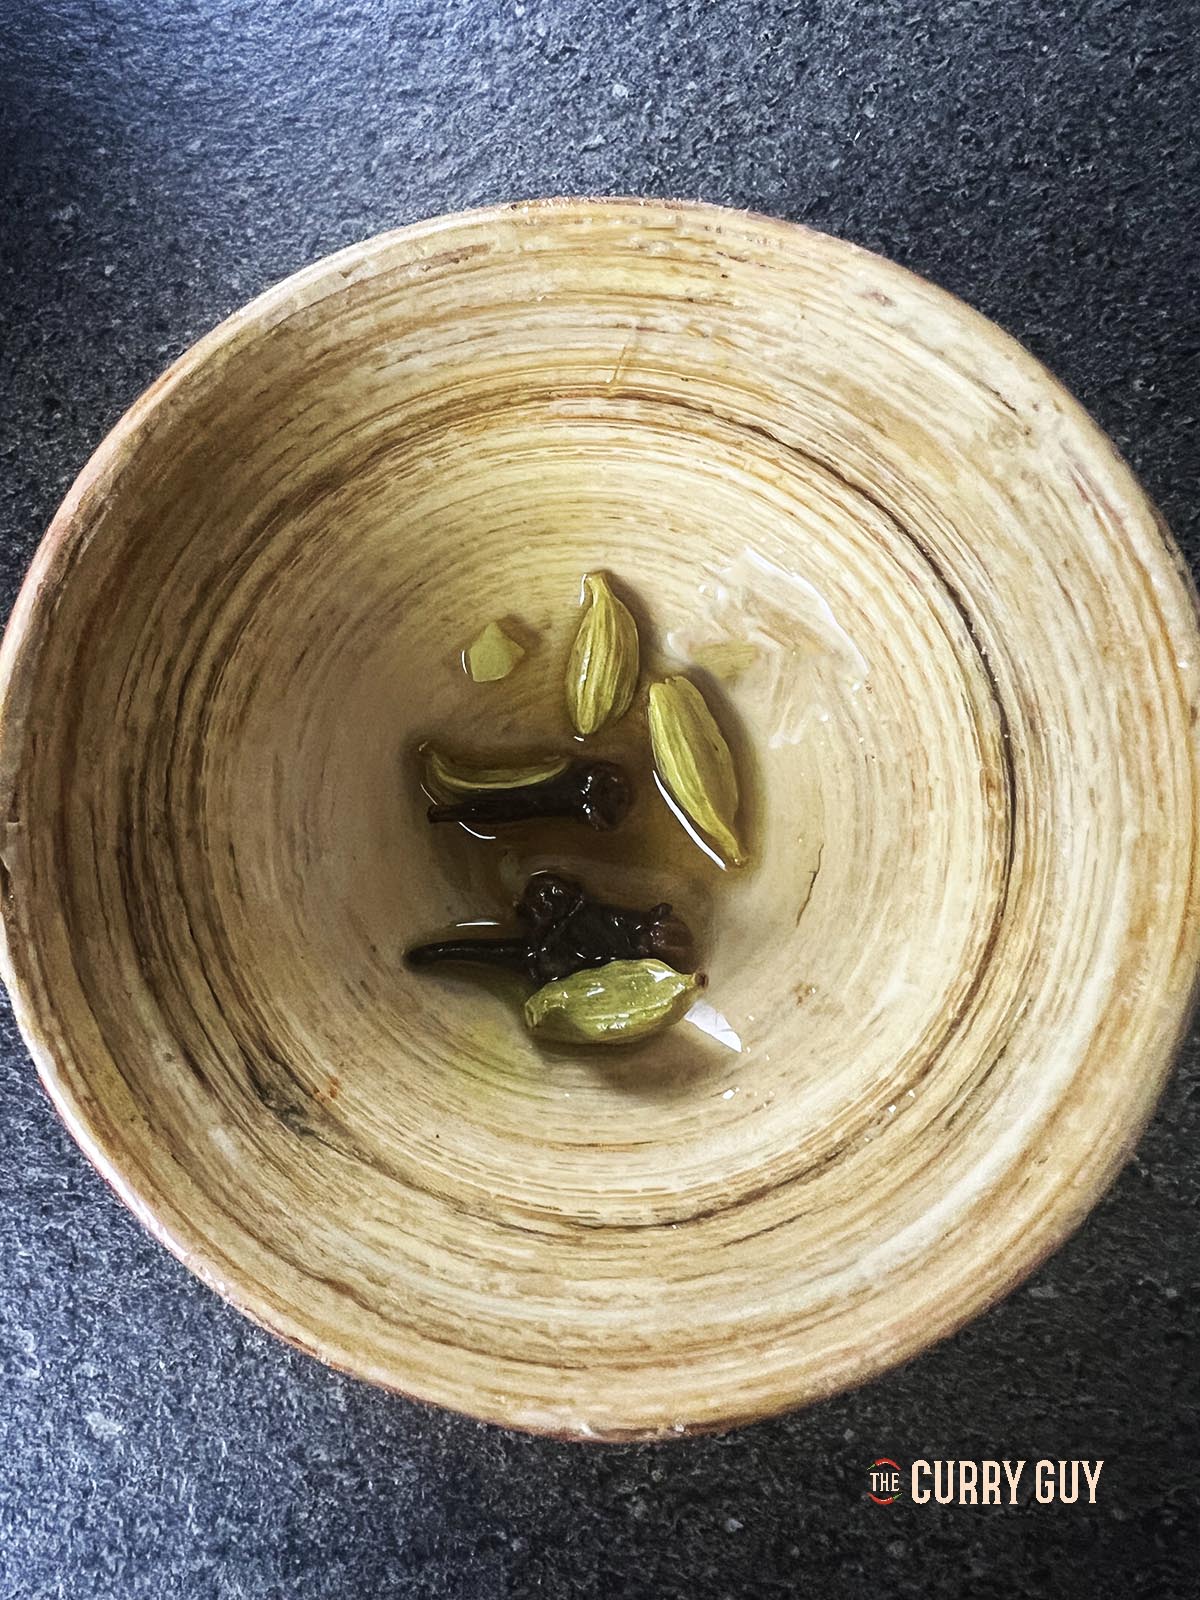 Removing the cardamom pods and cloves from the pan.